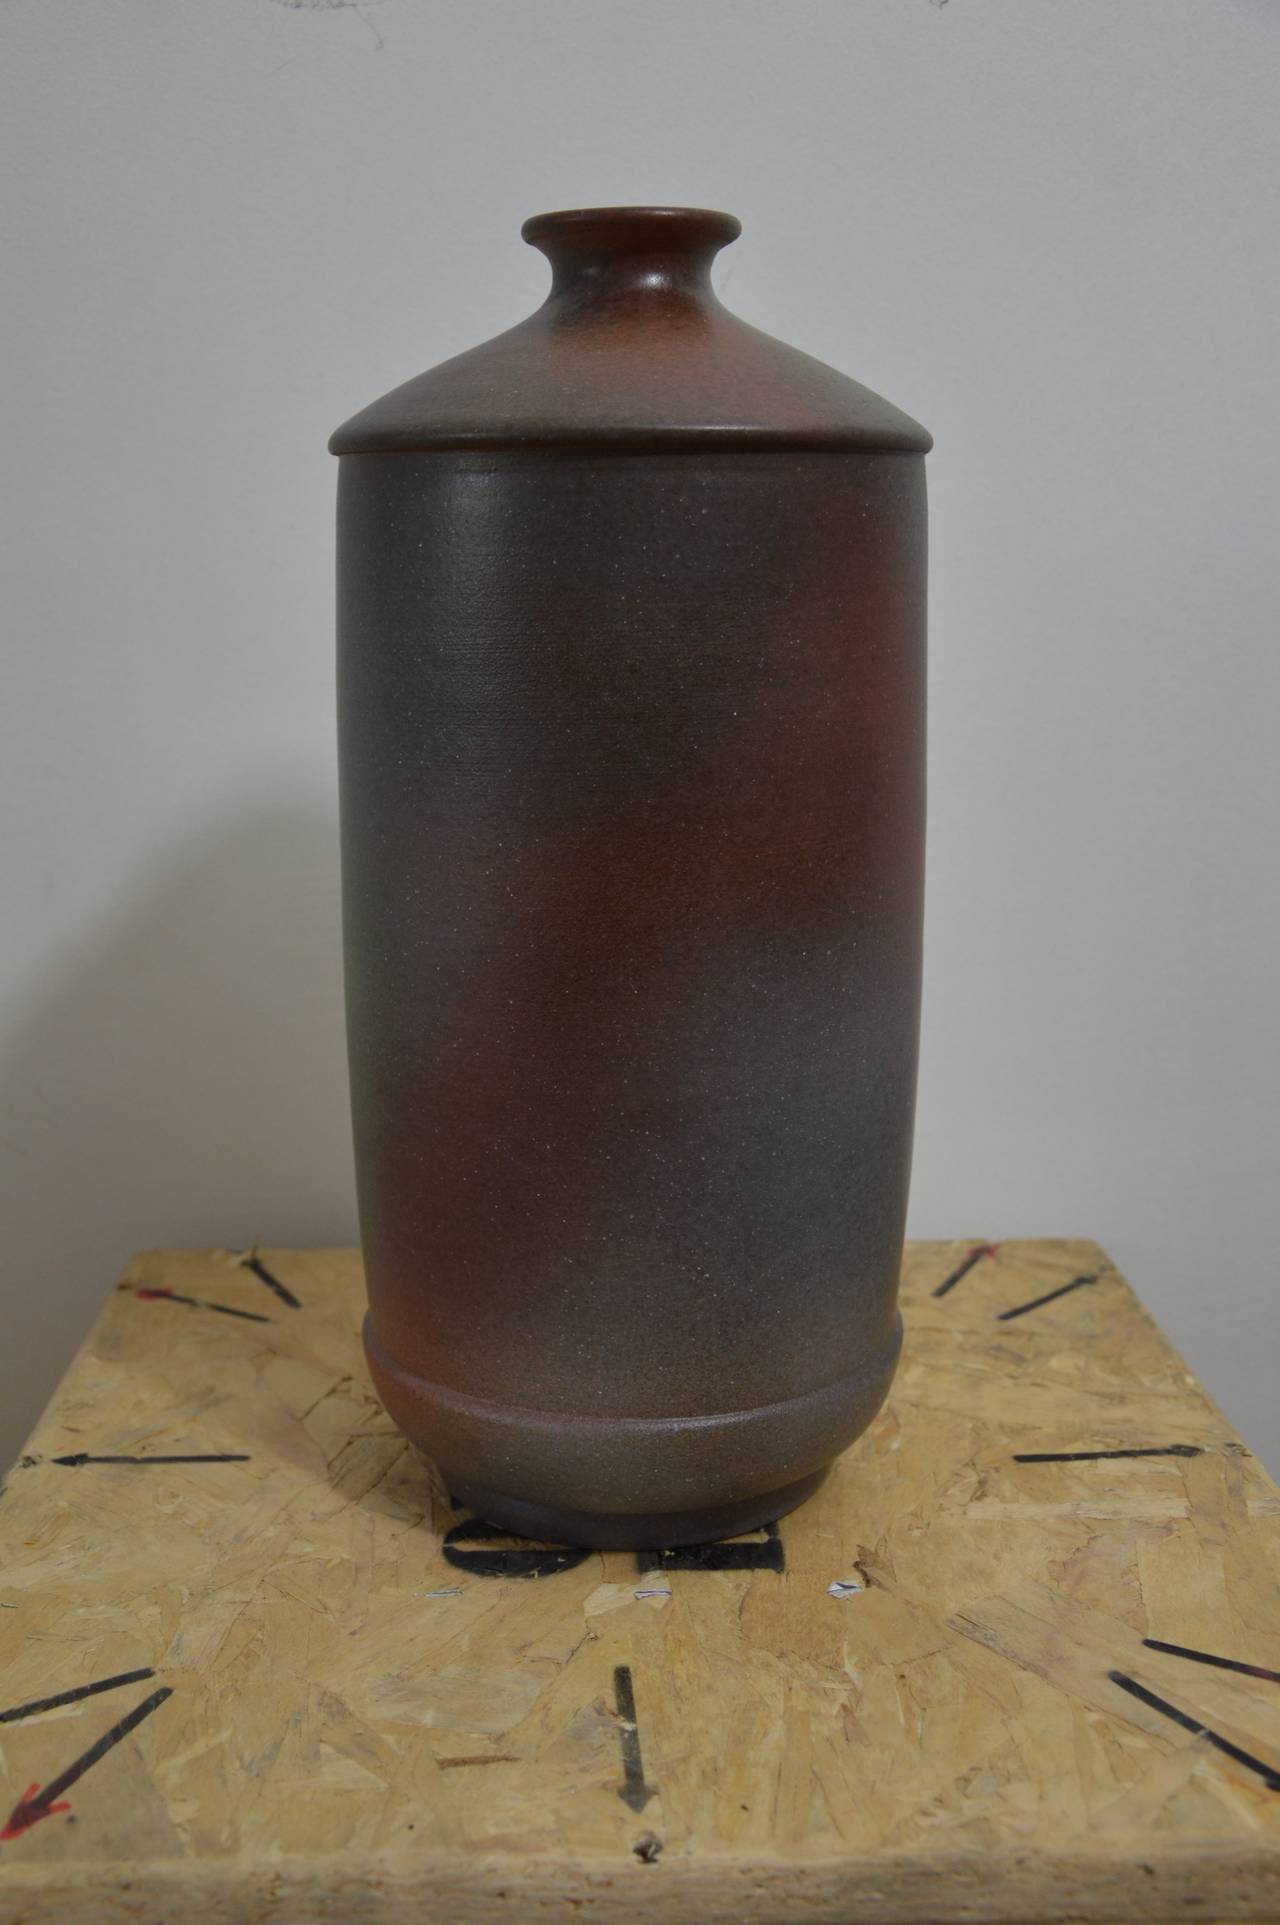 Vase in ceramic in shape of a bottle by Bitossi, colored black, red, green, like the cosmos. 
Limited edition of 99, numbered 019/99. Signed on the bottom. 
Measures :  H : 41cm  Diameter max : 18cm  Diameter of the top : 6,5cm